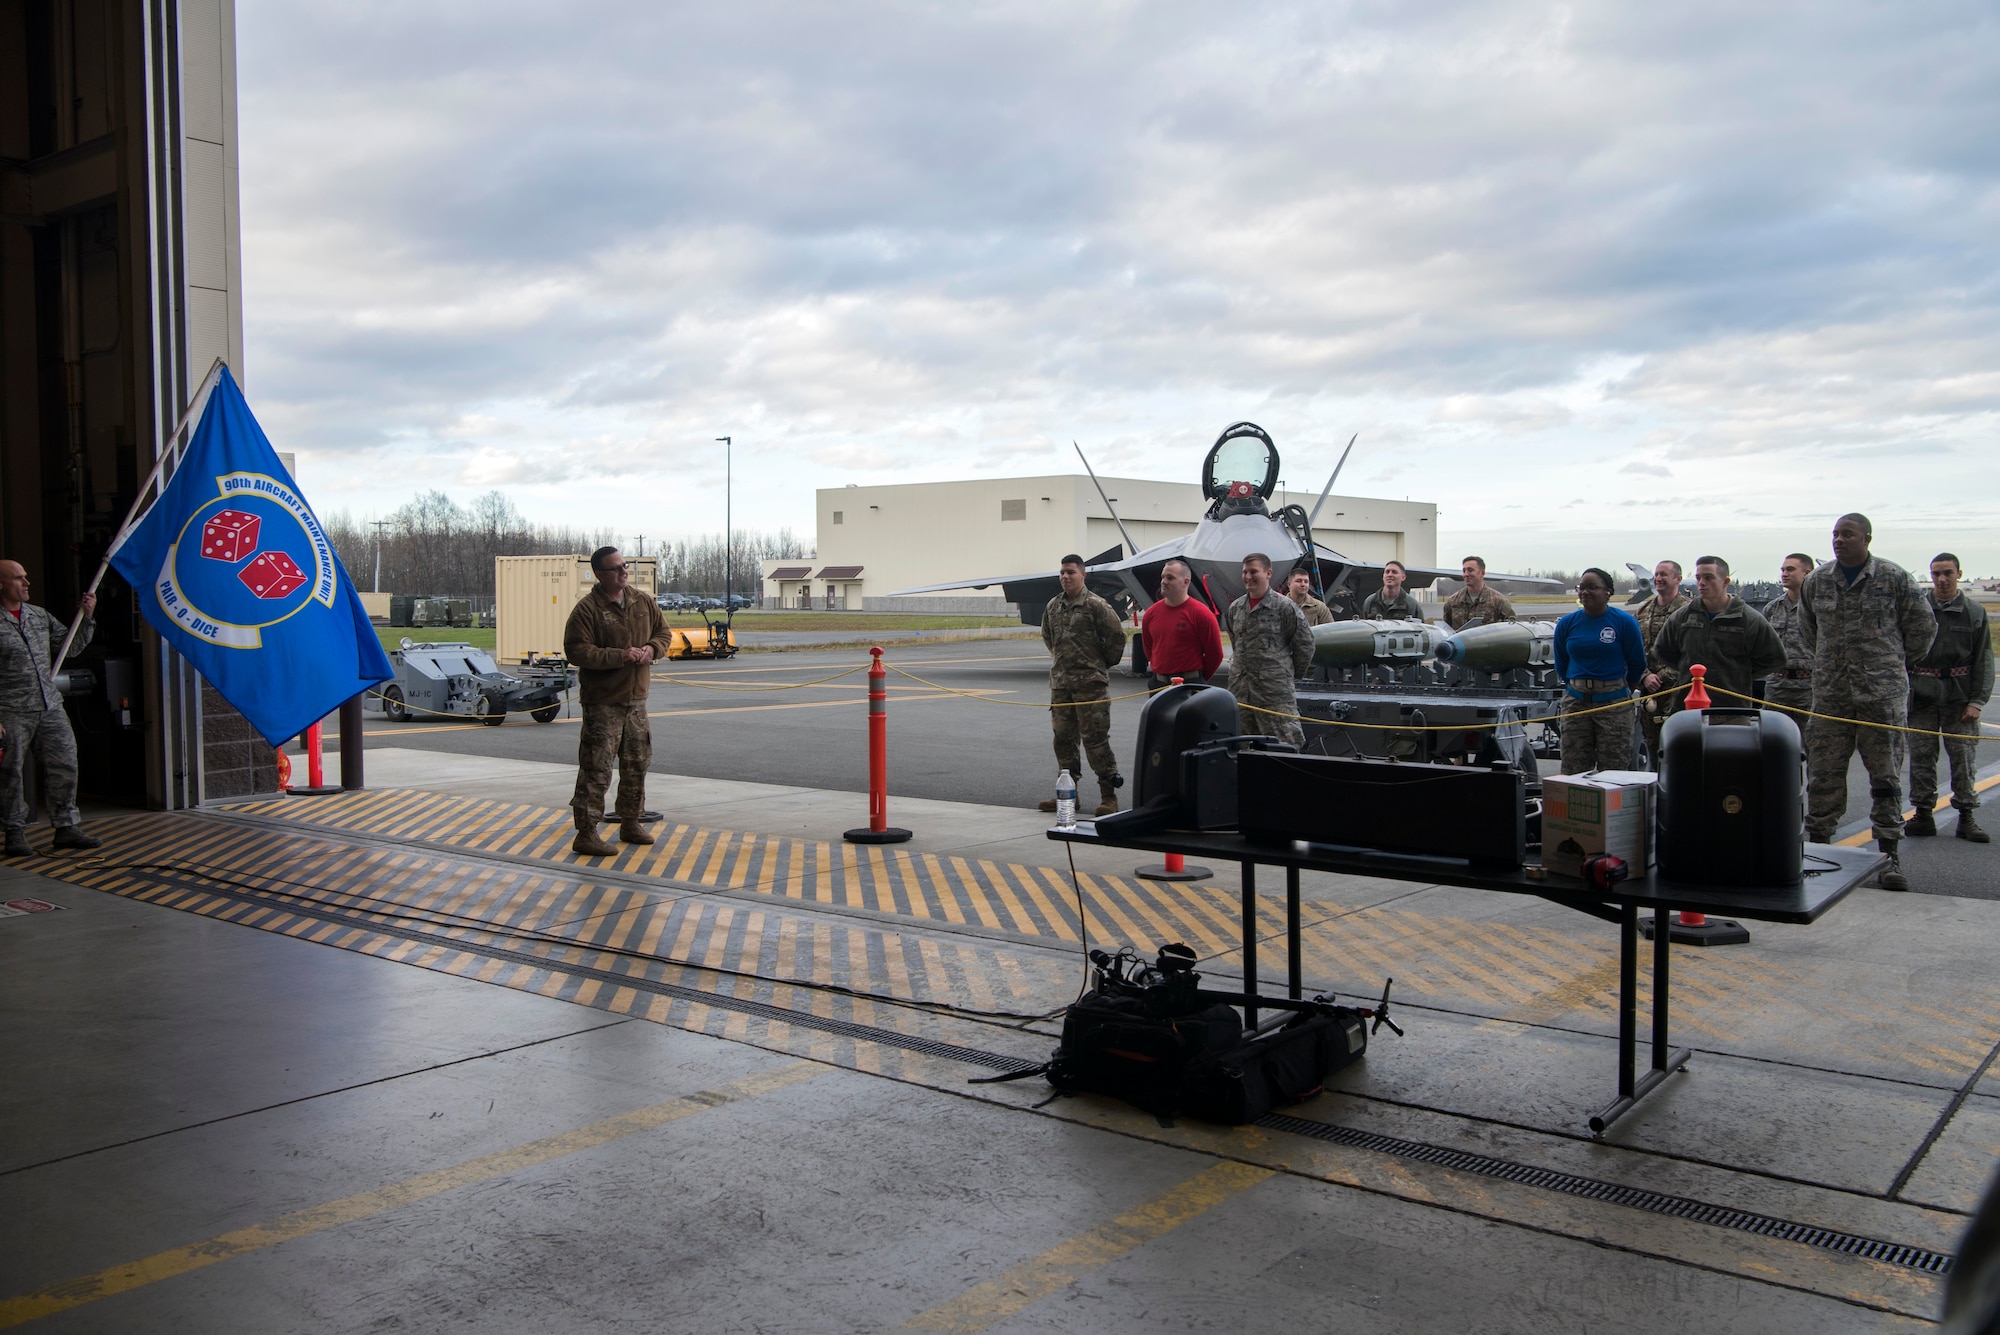 U.S. Air Force Chief Master Sgt. Paul Nightingale, 3rd Maintenance Group wing weapons manager, gives a speech prior to the quarterly load competition at Joint Base Elmendorf-Richardson, Alaska, Oct. 26, 2018. During the competition, Airmen from the 525th and 90th aircraft maintenance units tested their skills as load crew members for the F-22 Raptor. The event demonstrates the skill level and knowledge of all JBER aircraft maintainers.